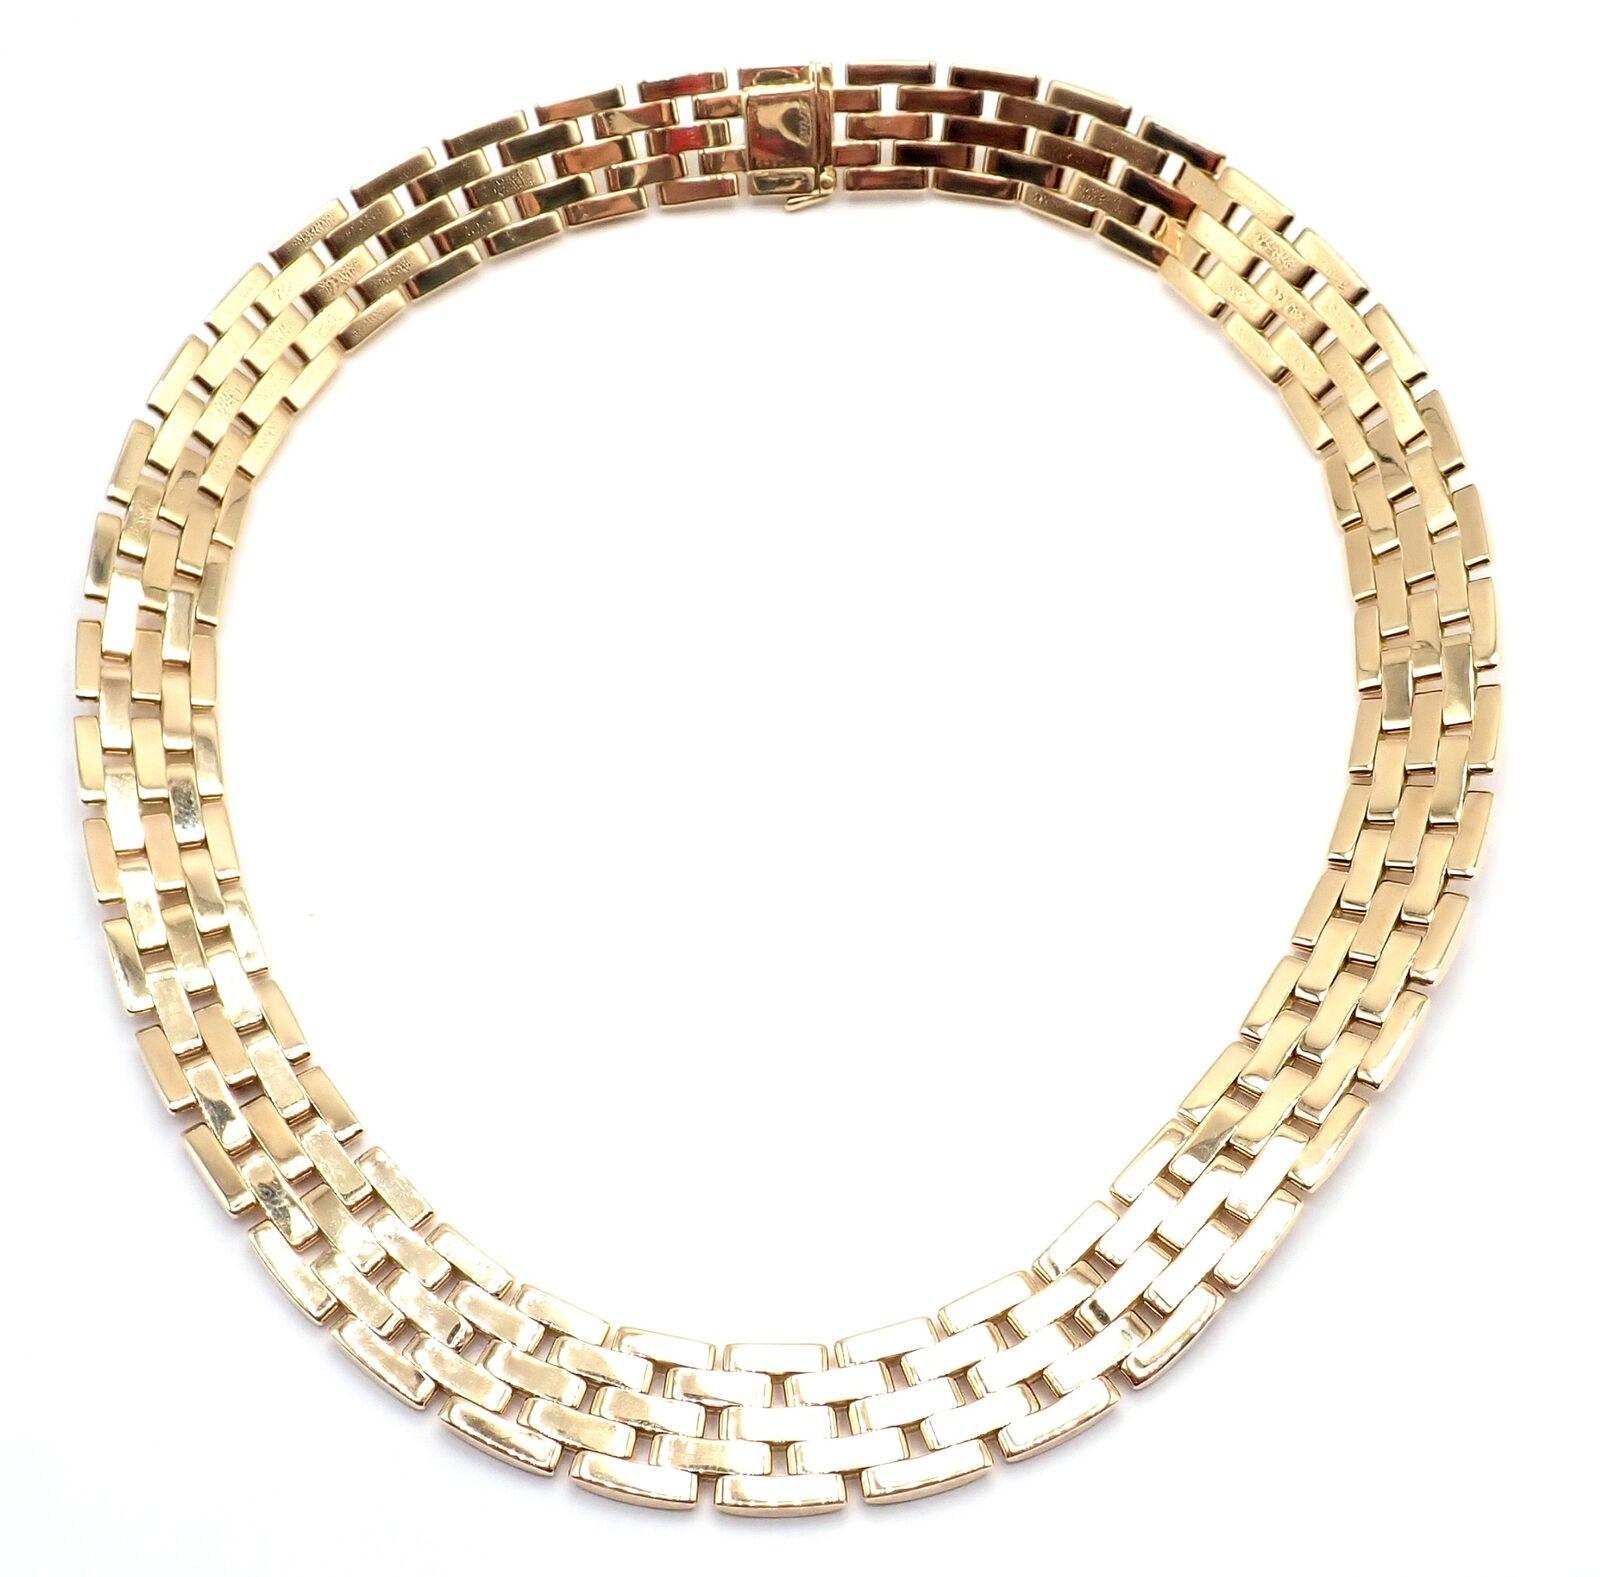 18k Yellow Gold Five-Row Maillion Panthere Necklace by Cartier.
This stunning necklace comes with an original Cartier box & service paper from Cartier from NYC.
Details:
Weight:  134.9 grams 
Length: 16